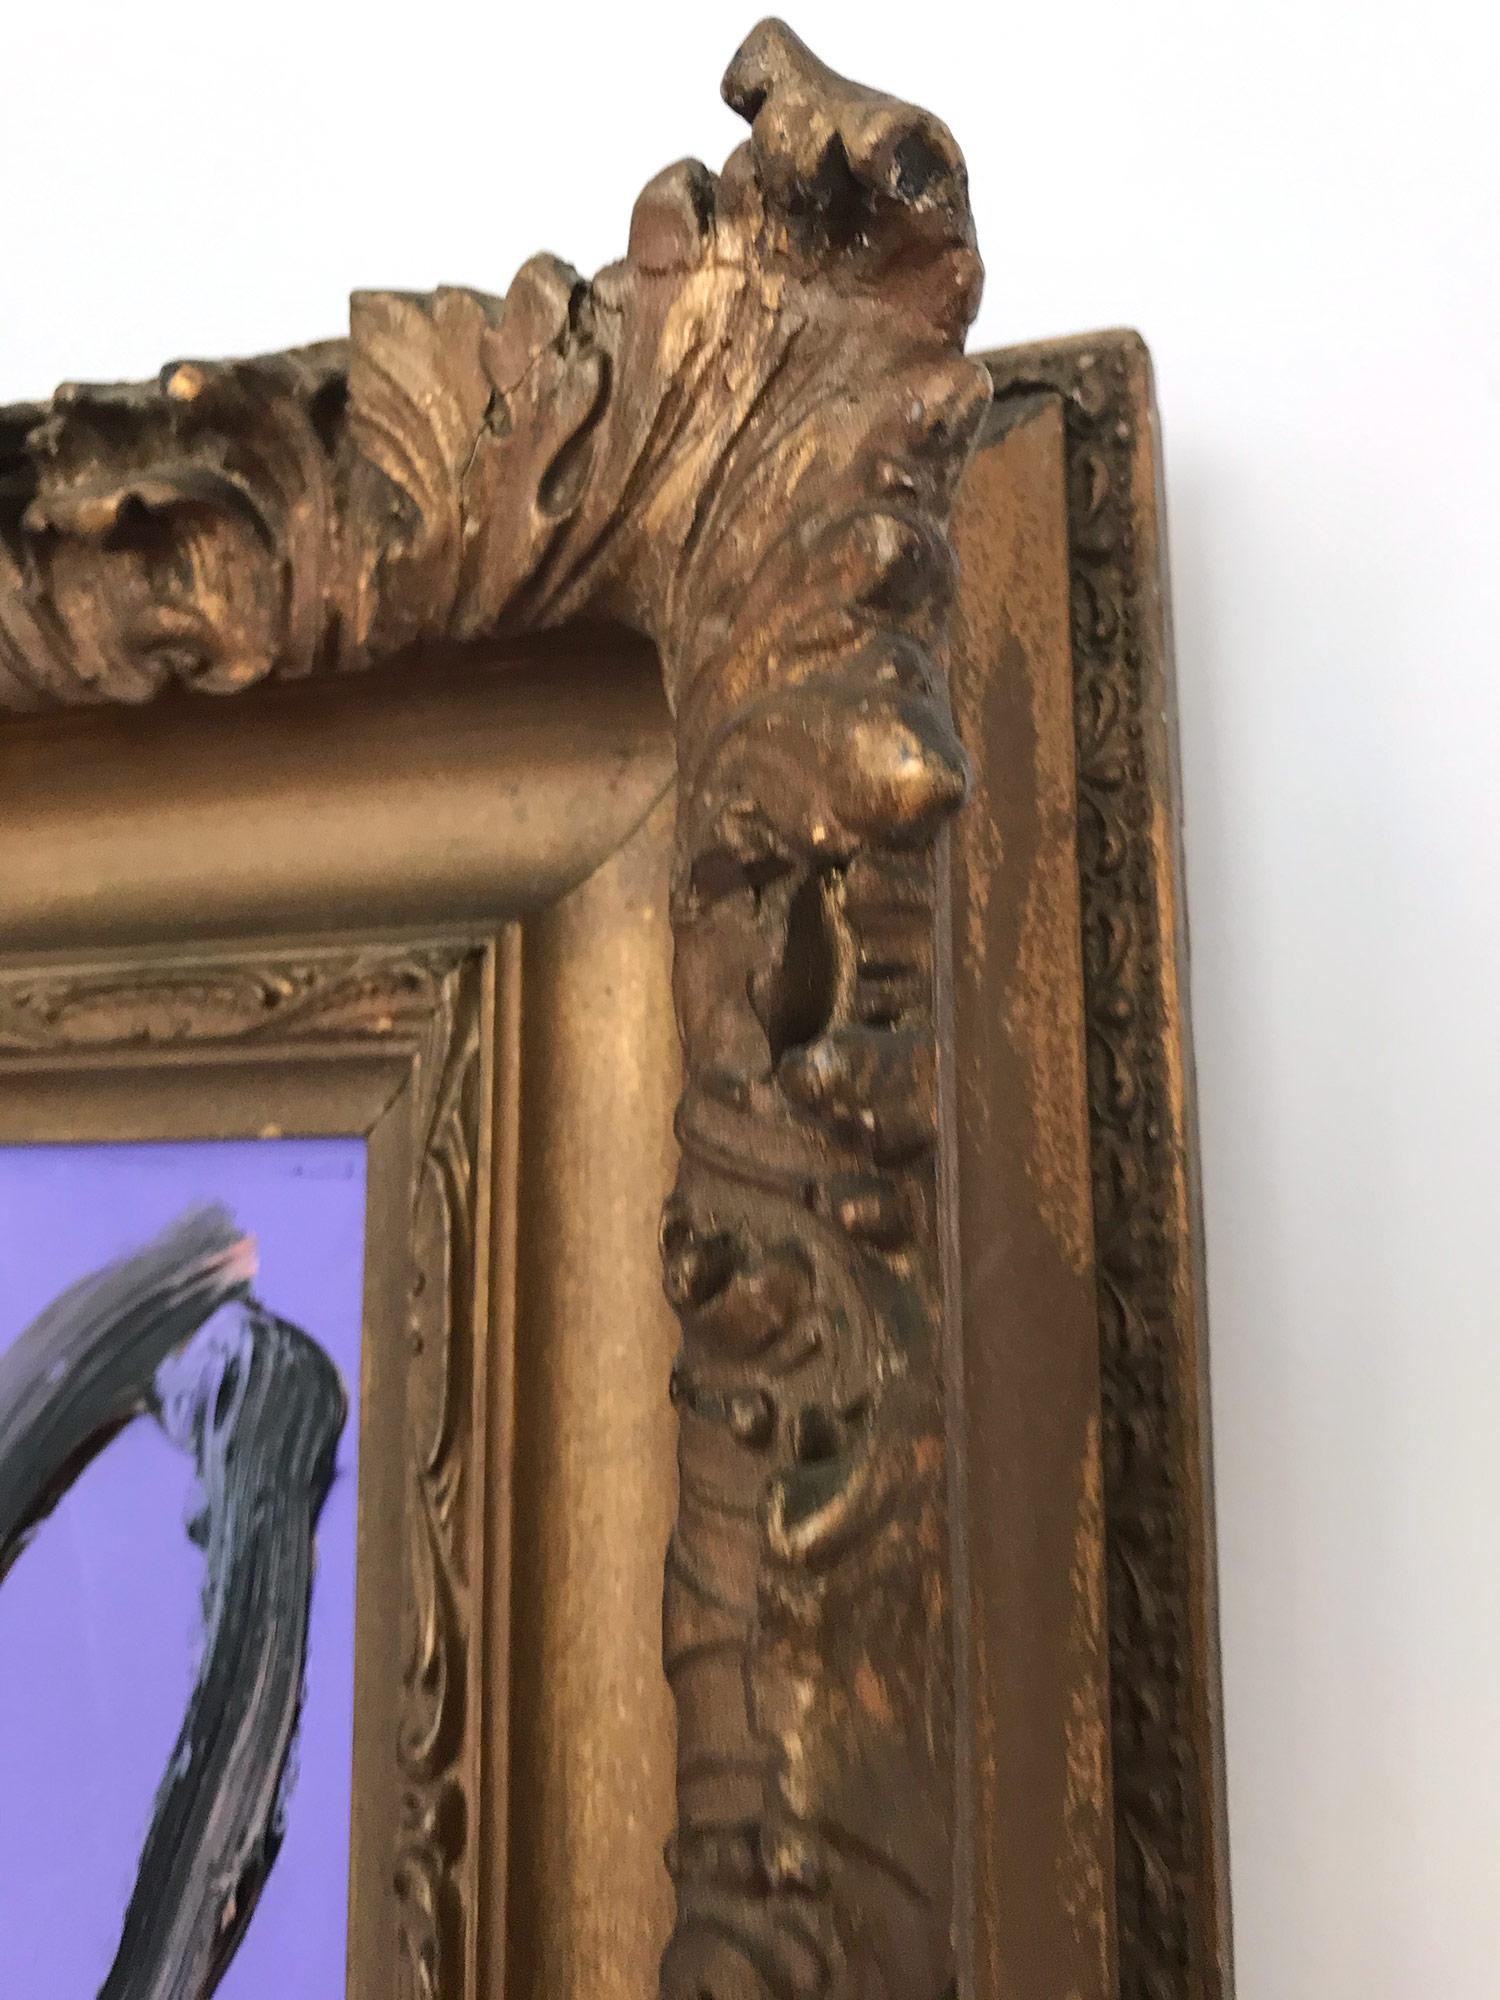 A wonderful composition of one of Slonem's most iconic subjects, Bunnies. This piece depicts a gestural figure of a black bunny on a Deep Purple Lavendar background with thick use of paint. It is housed in a wonderful antique 19th Century frame.